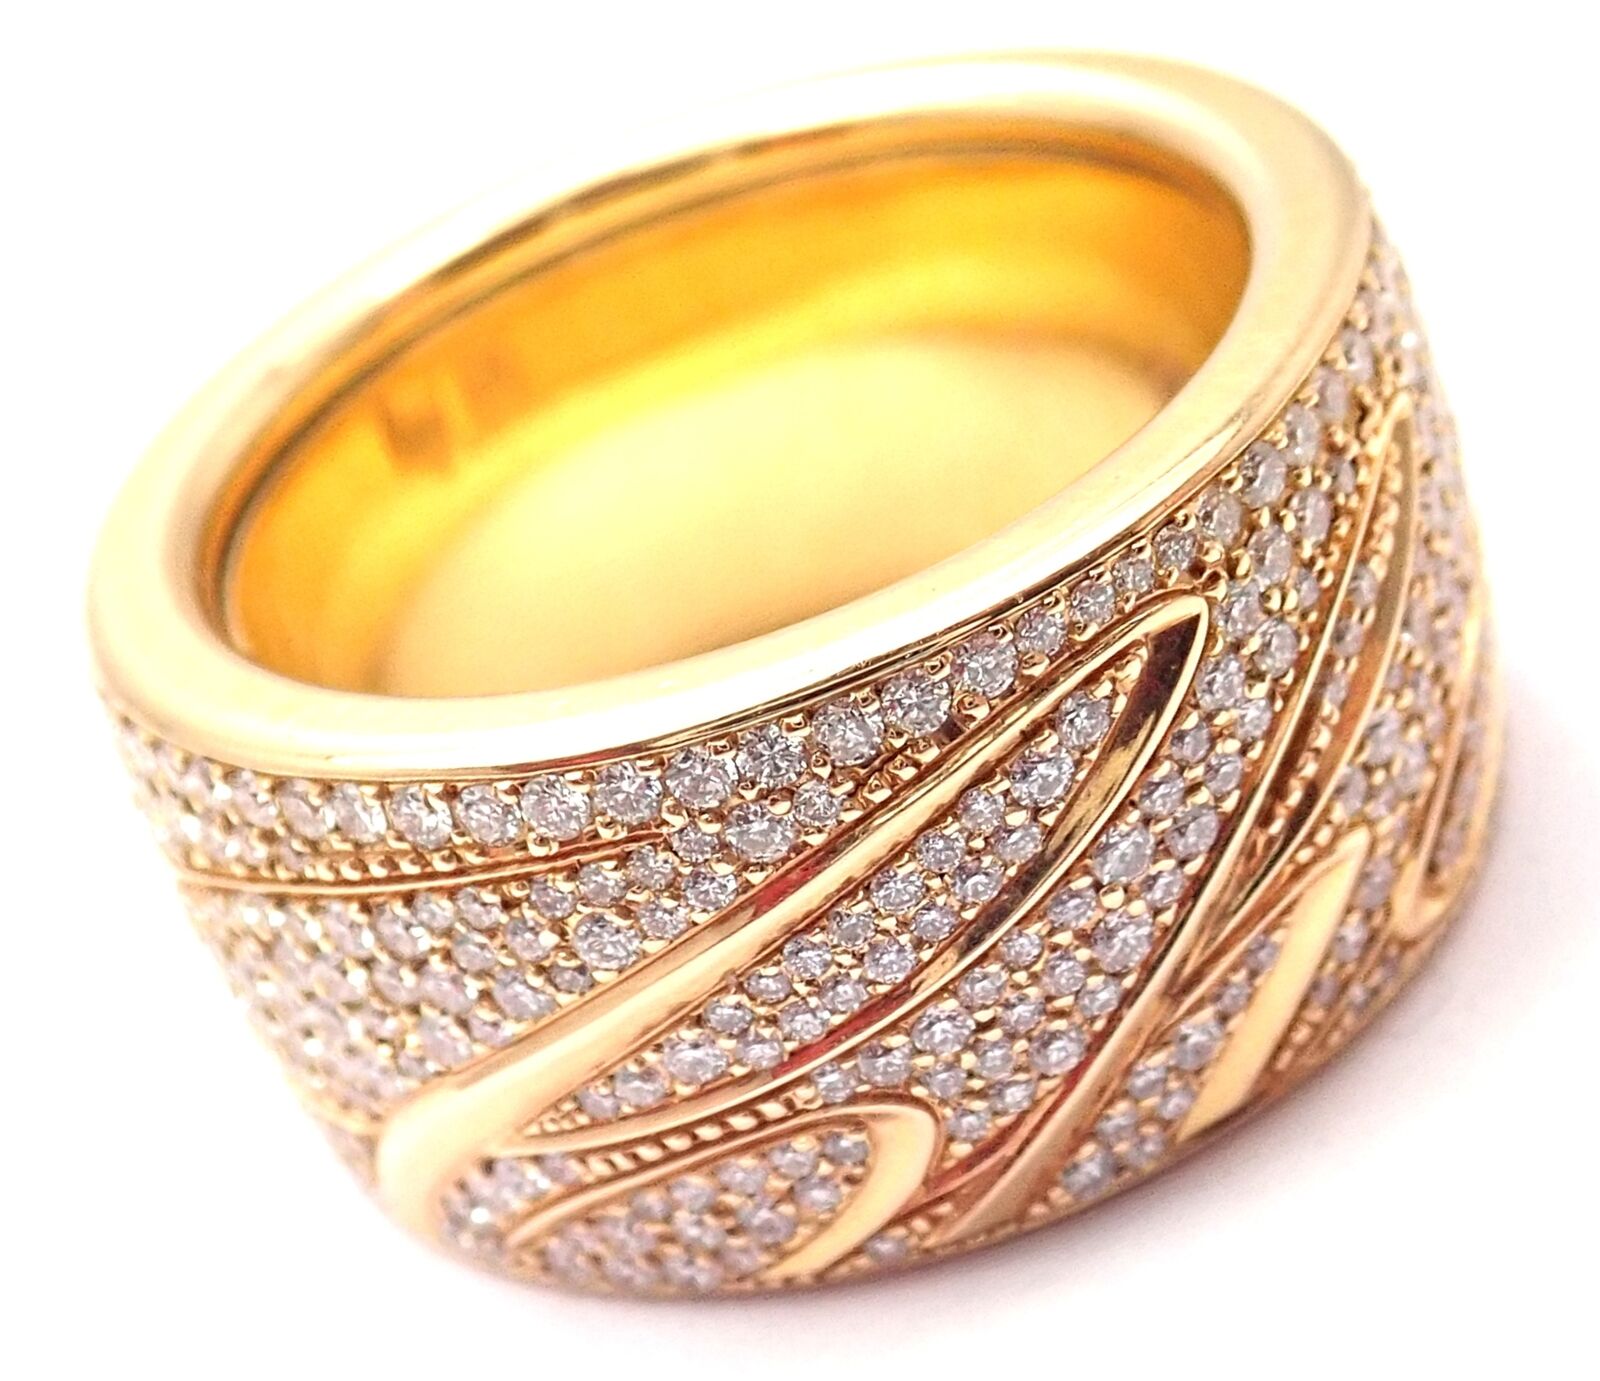 Color Blossom Signet Ring, Yellow Gold, White Gold And Diamonds -  Categories Q9M82I